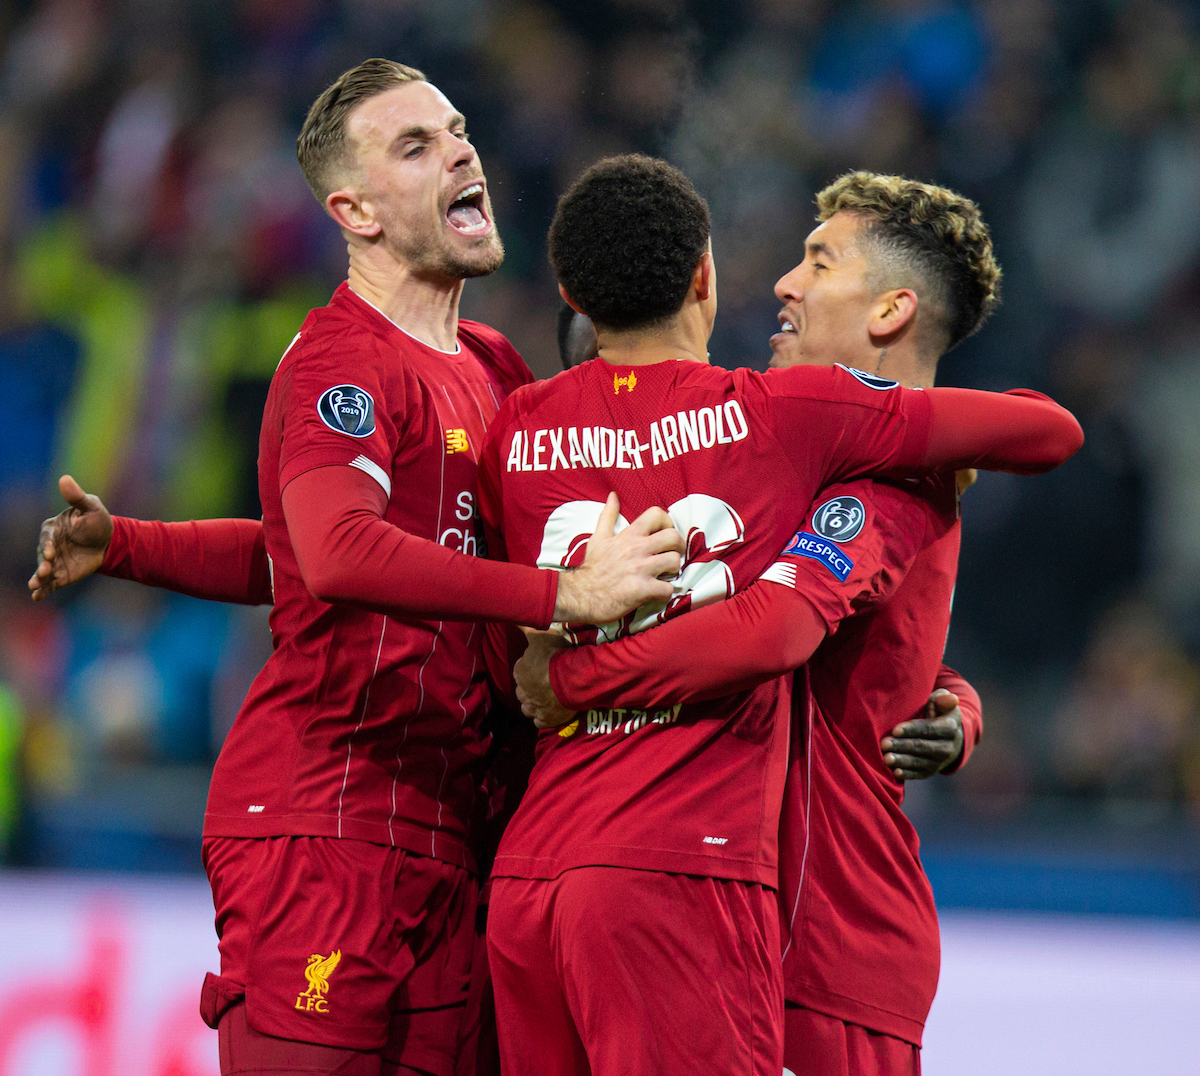 SALZBURG, AUSTRIA - Tuesday, December 10, 2019: Liverpool players captain Jordan Henderson, Trent Alexander-Arnold and Roberto Firmino celebrate the opening goal scored by Sadio Mané (hidden) during the final UEFA Champions League Group E match between FC Salzburg and Liverpool FC at the Red Bull Arena. (Pic by David Rawcliffe/Propaganda)